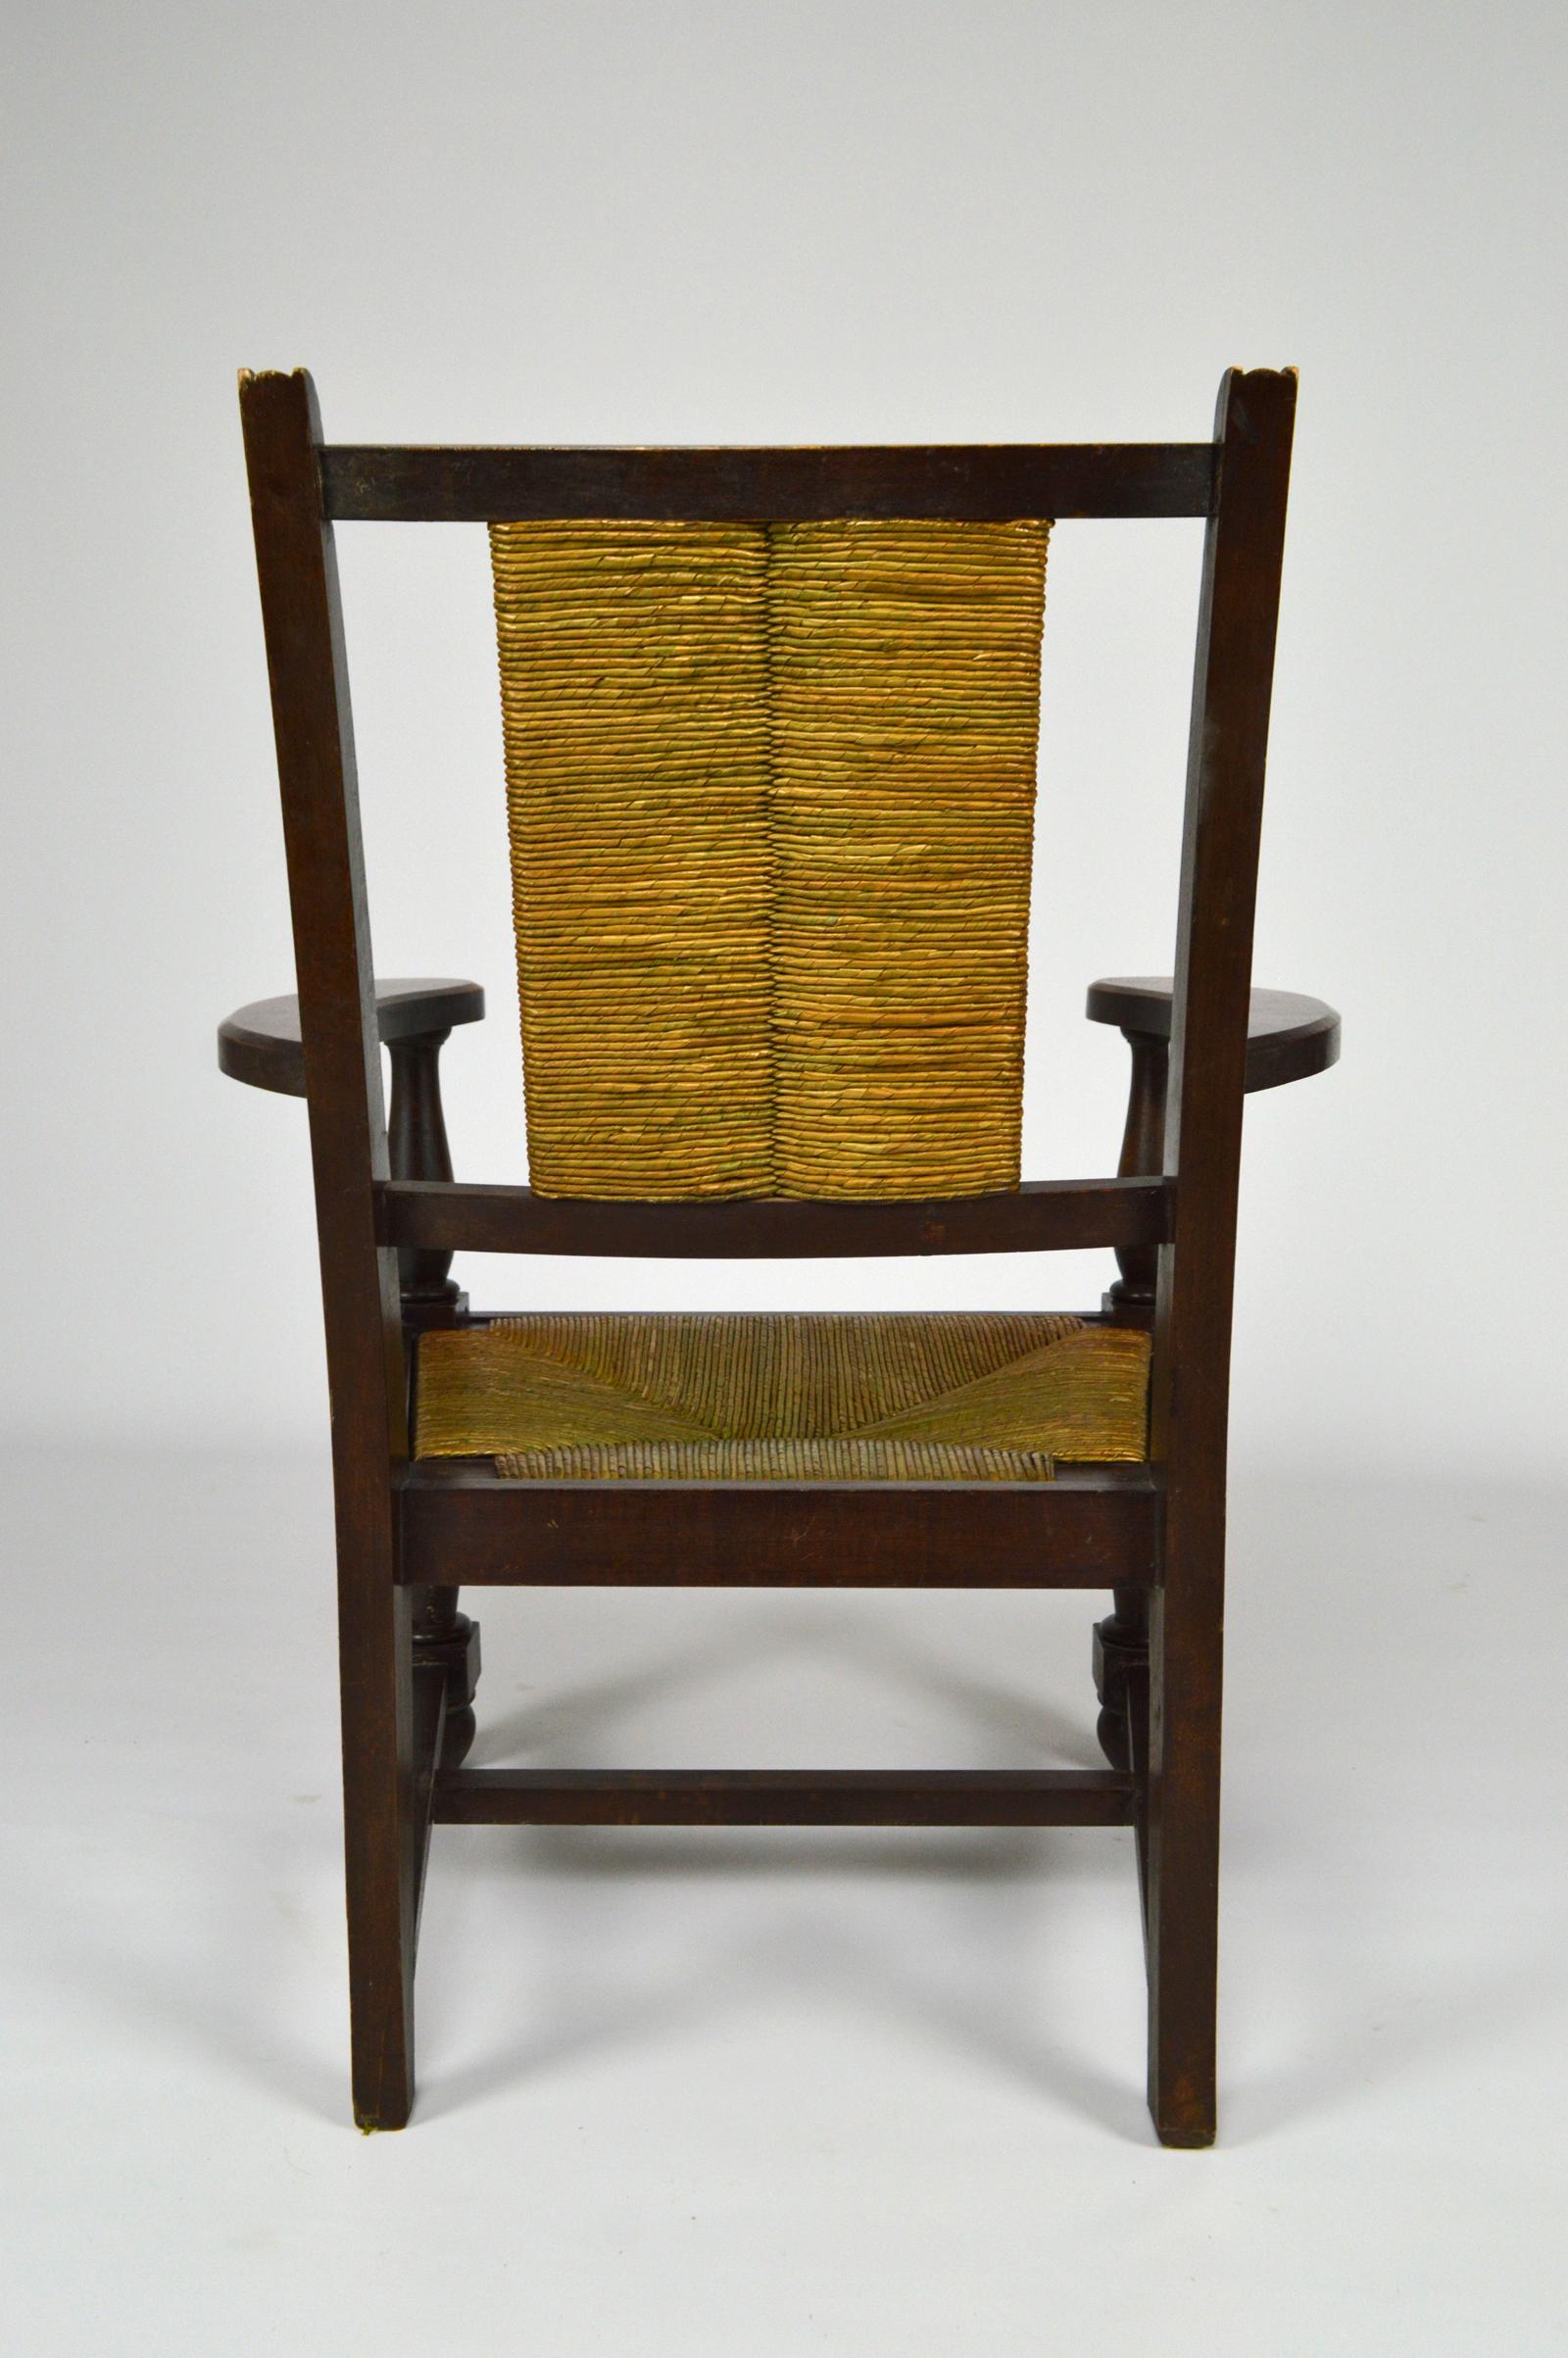 Modernist Art Deco Armchair, France, Midcentury In Good Condition For Sale In L'Etang, FR